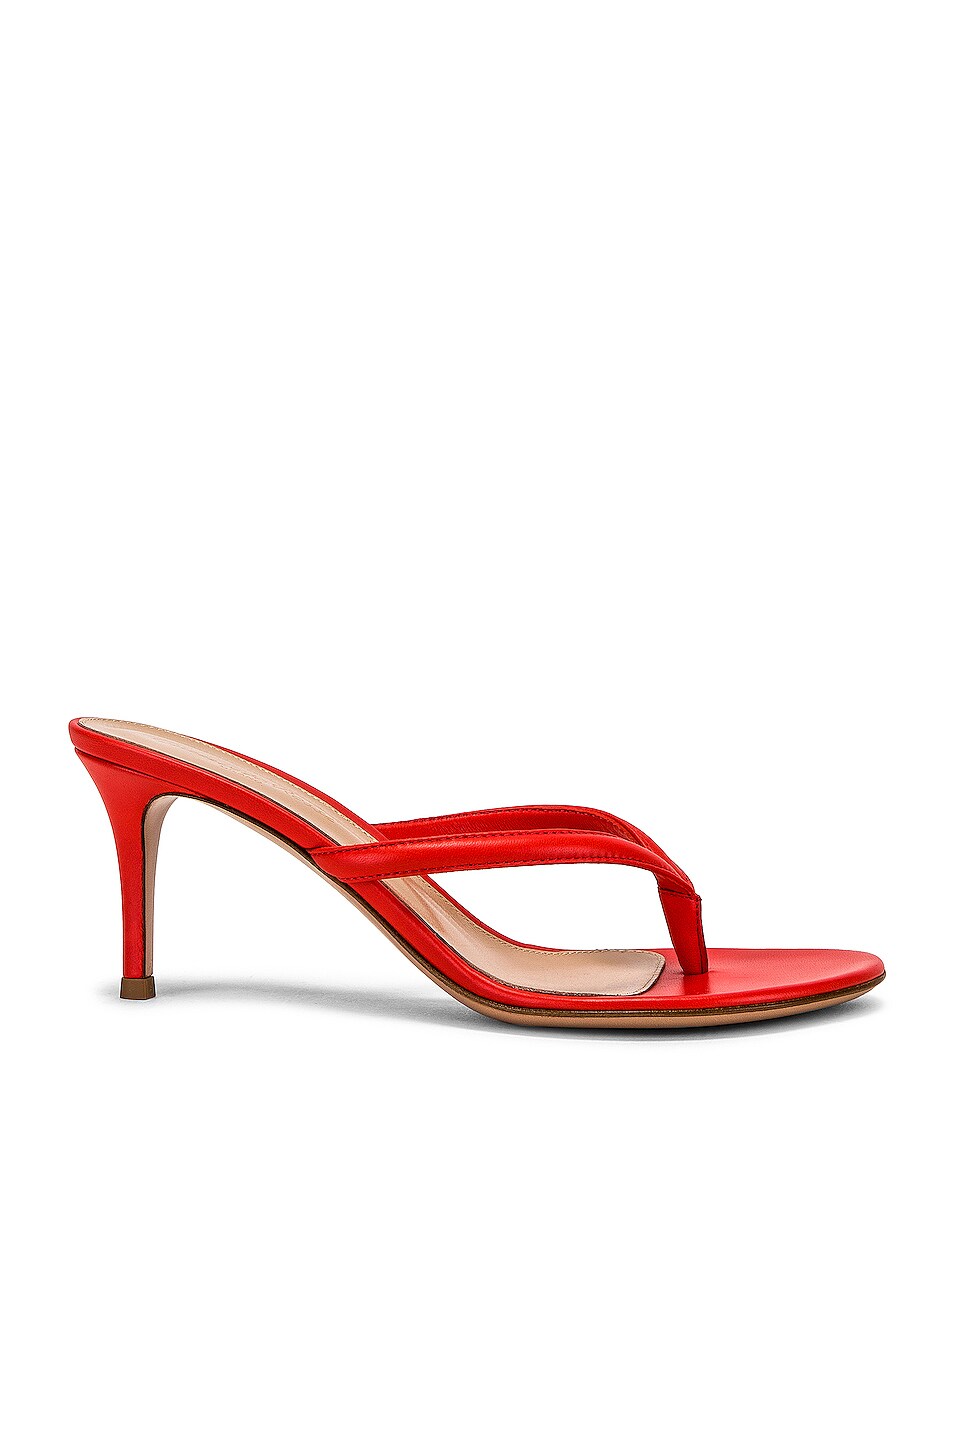 Image 1 of Gianvito Rossi Calypso Thong Sandals in Poppy